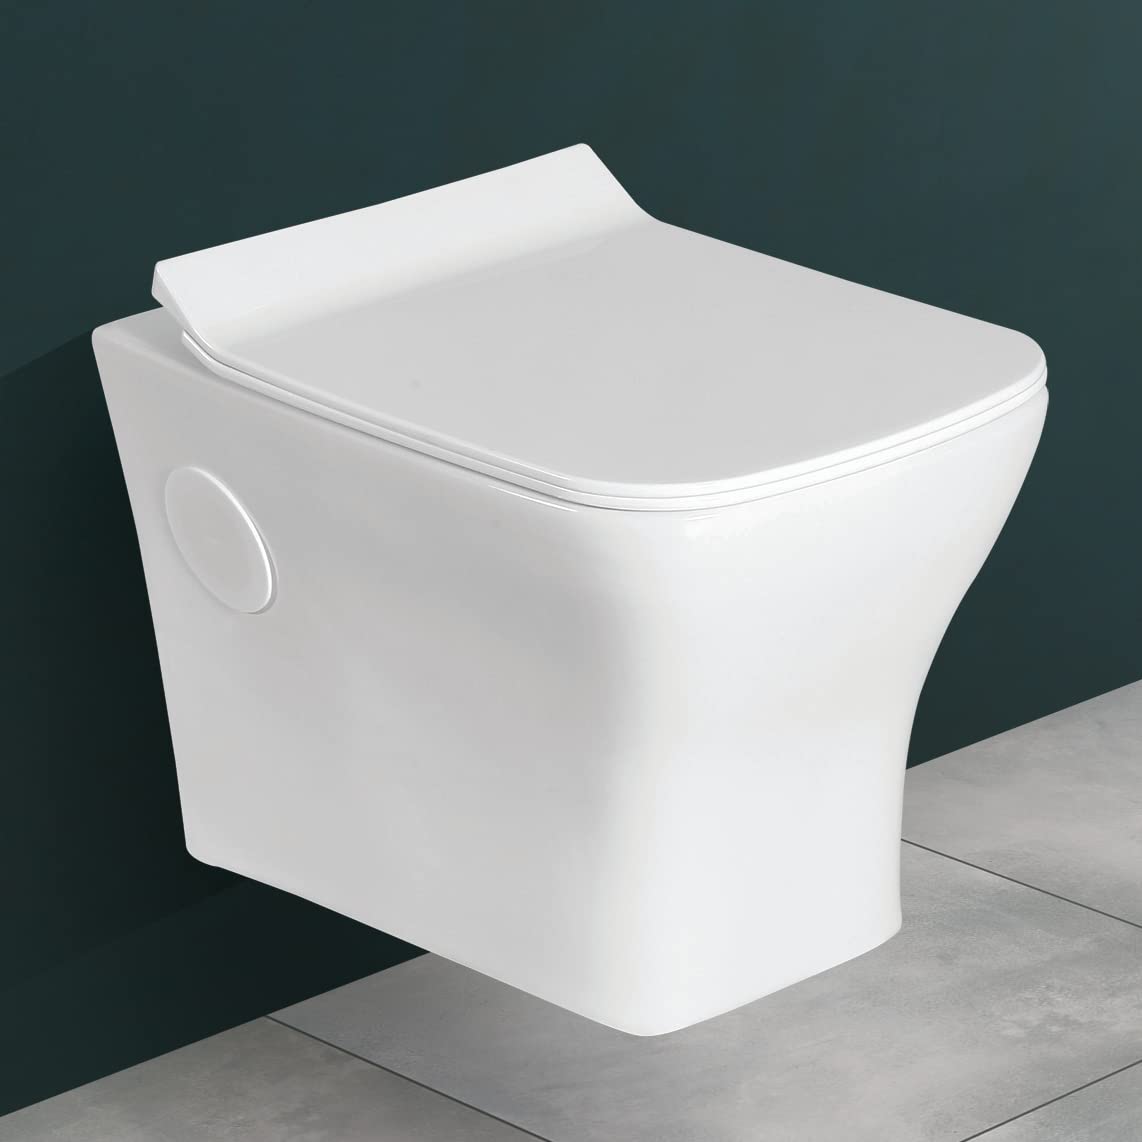 Plantex Platinium Ceramic Wall Hung Western Toilet, Water Closet, Commode With Soft Close Toilet Seat - (APS-774, White)